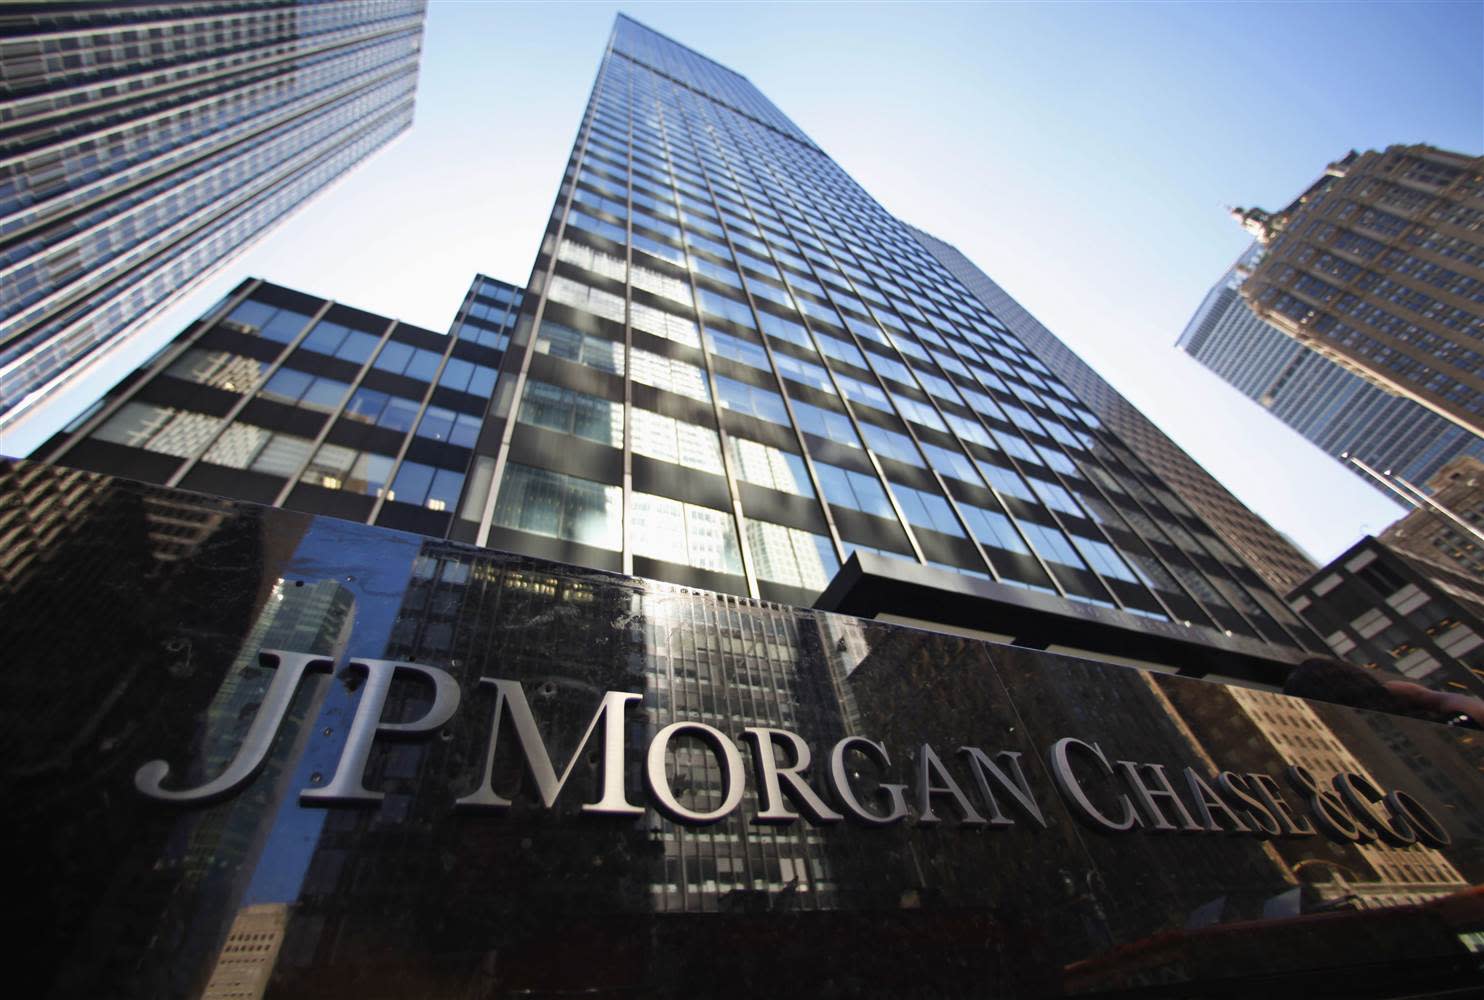 Crypto craze: JP Morgan launches cryptocurrency [Video]